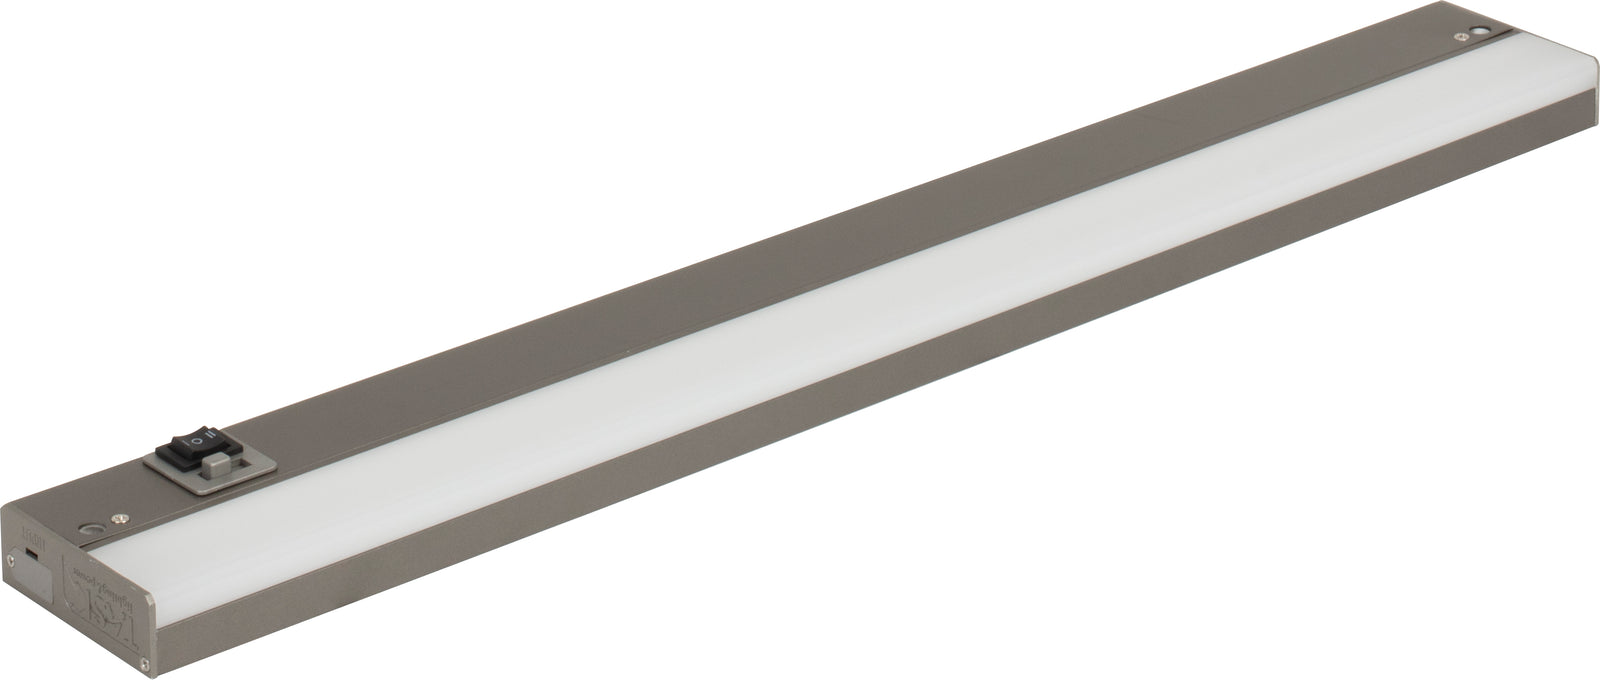 120-Volt Bar Light, Dimmable and 3-Kelvin Temperature Selectable 3000K, 4000K and 5000K